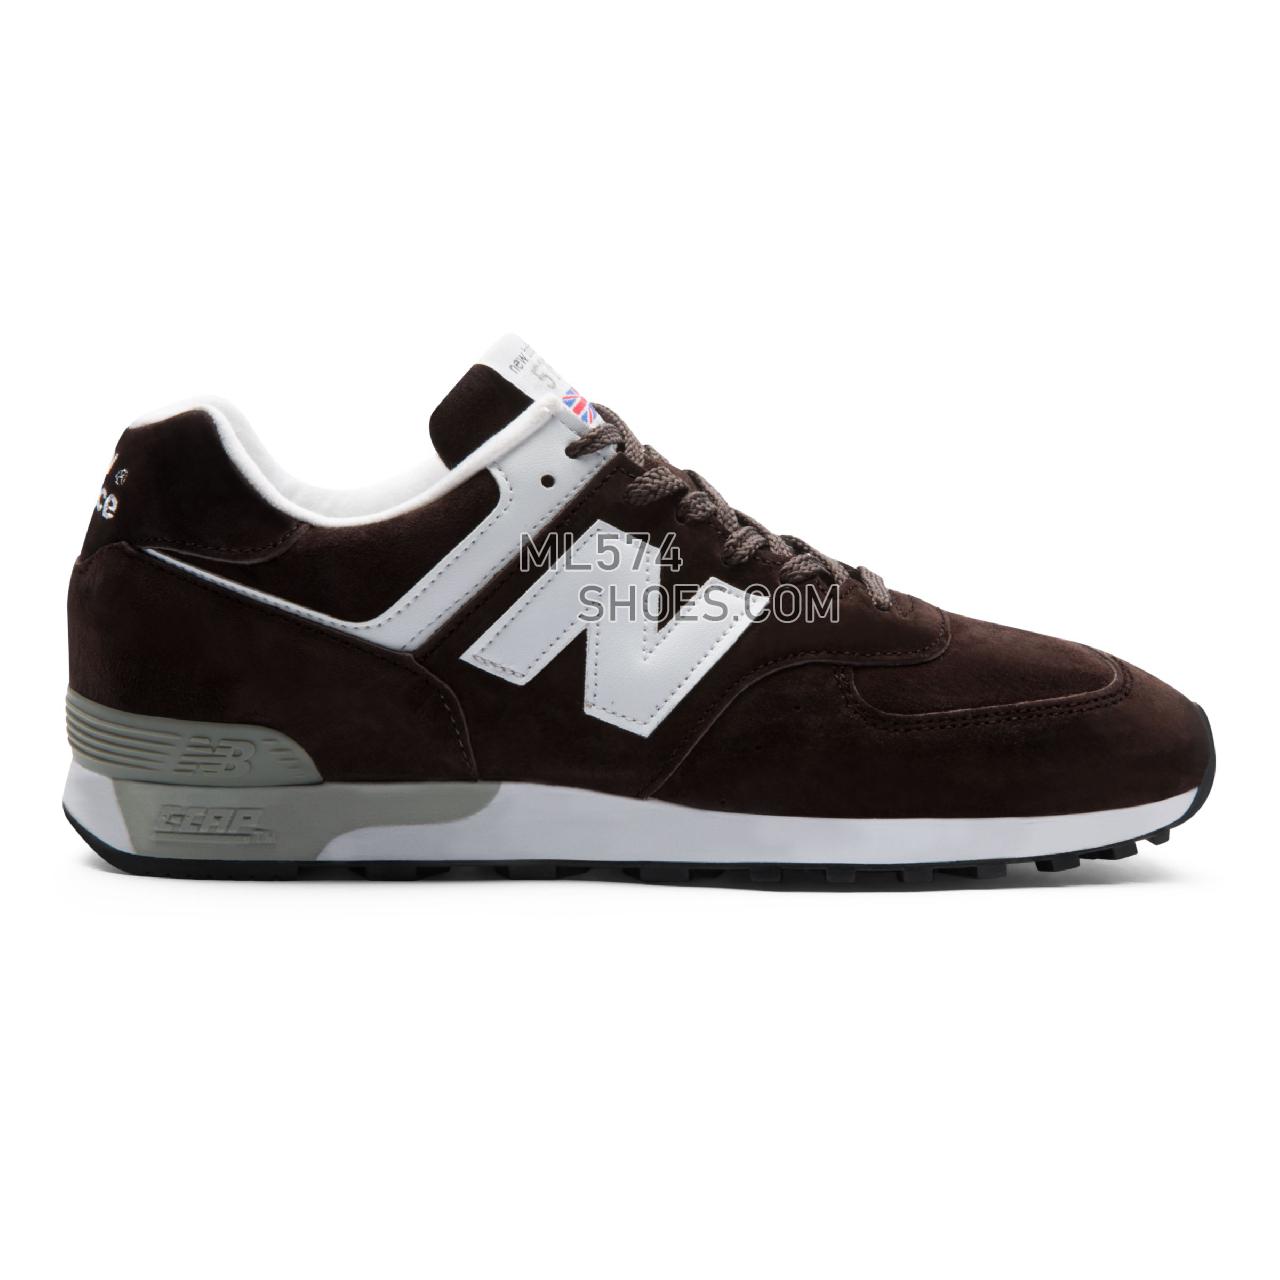 New Balance Made in UK 576 - Men's Made in UK 576 - Dark Brown with White - M576DBW